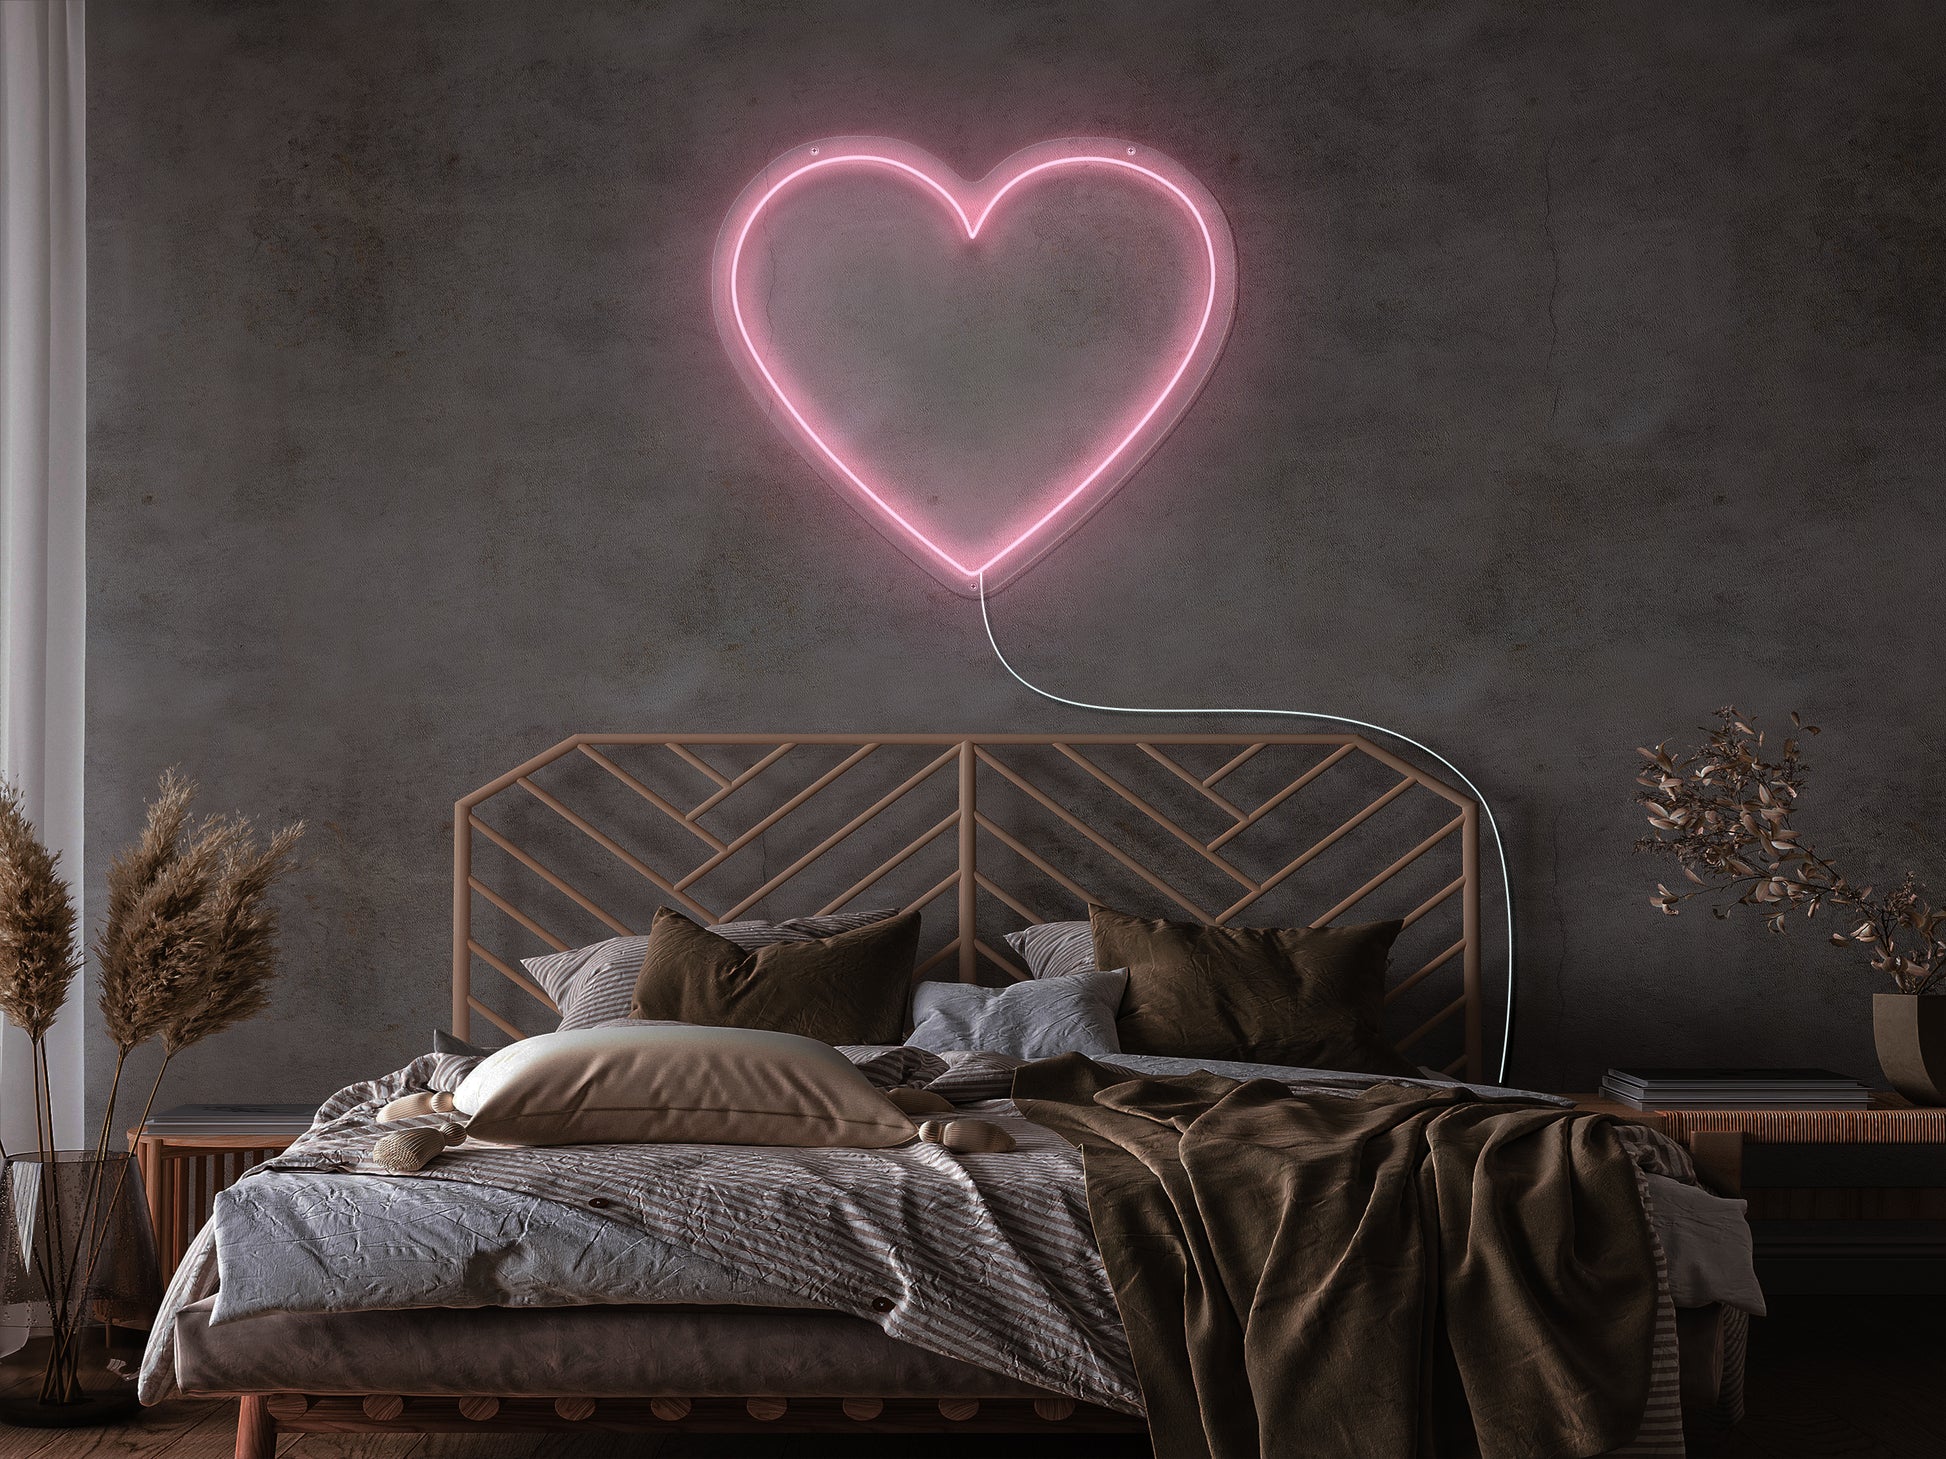 "A bright hot pink neon sign of a heart, illuminating a dimly lit room, perfect for romantic or love-themed decoration